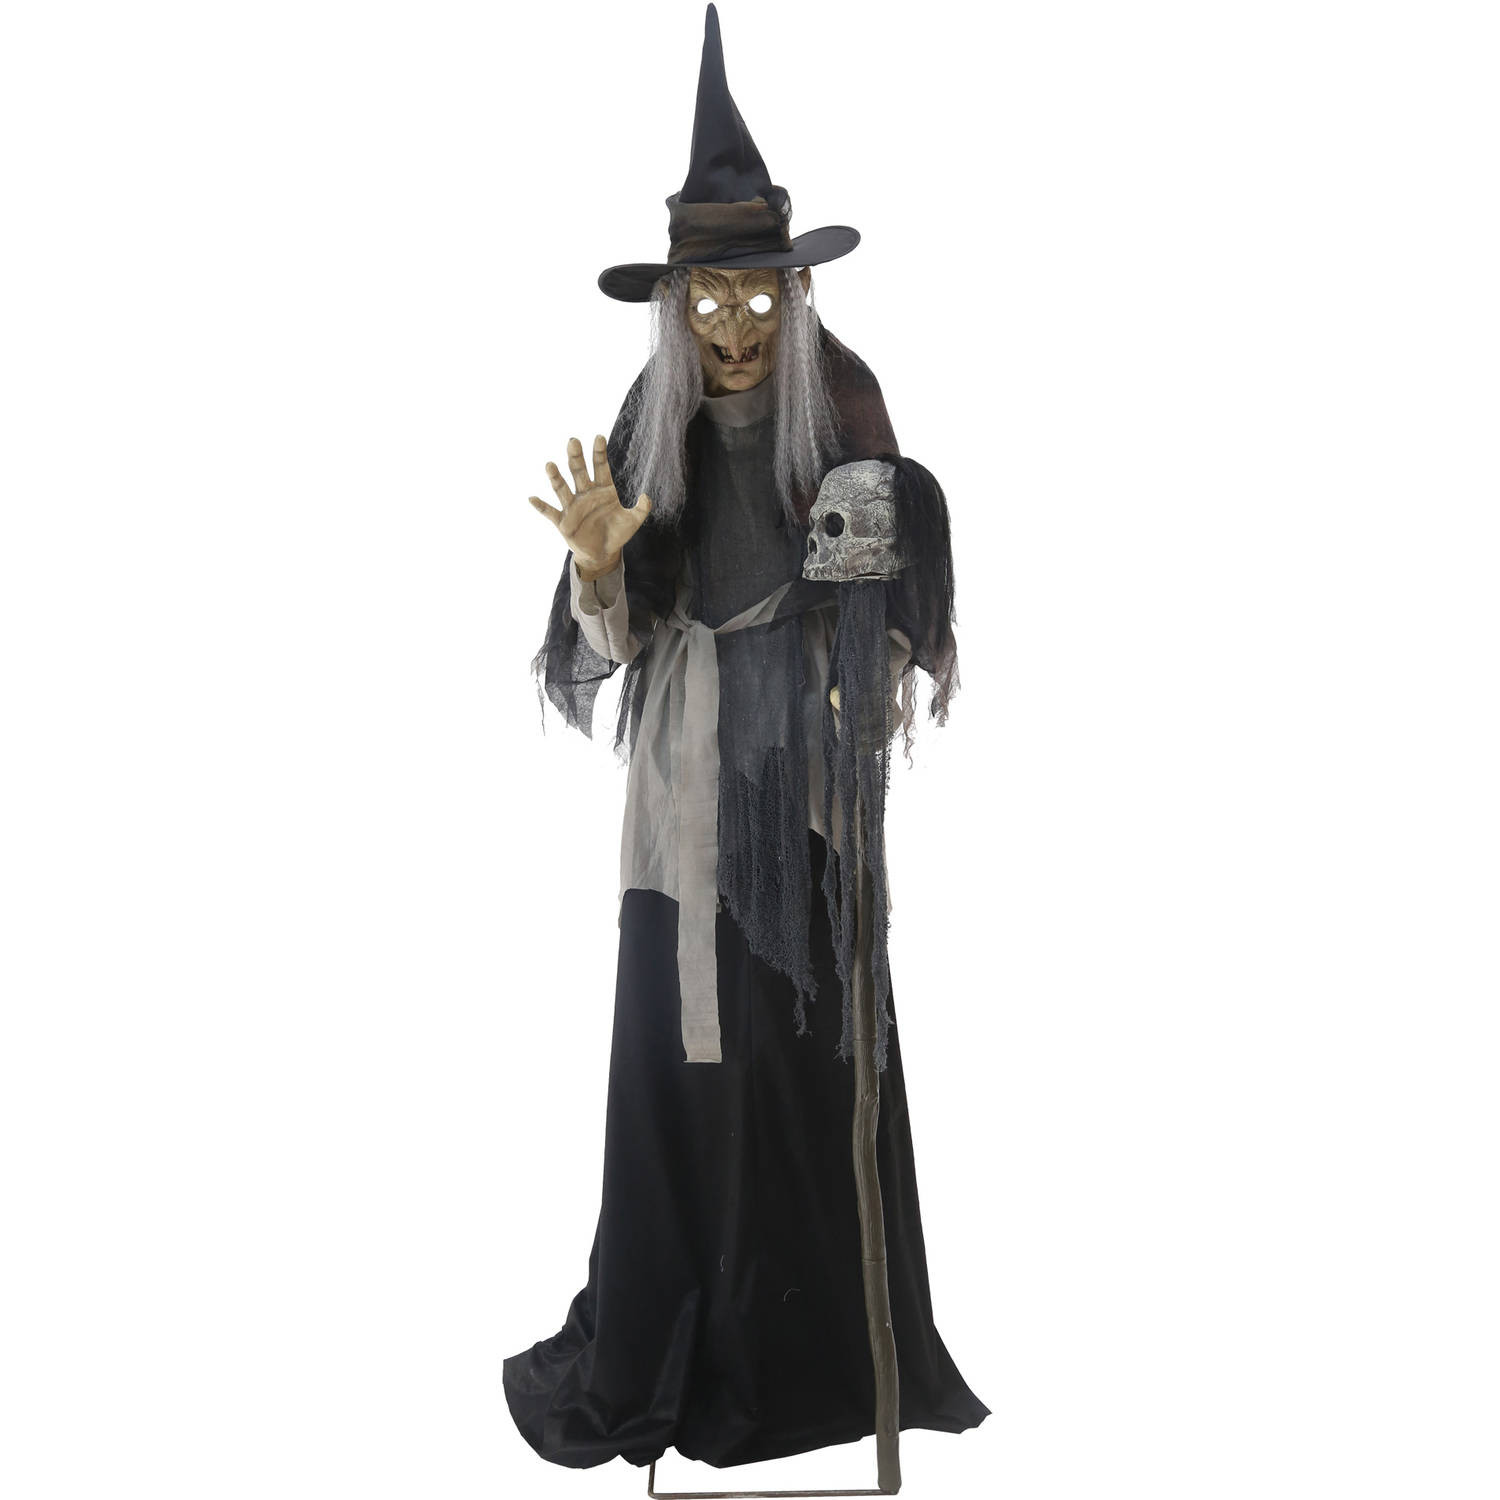 Stew Brew Witch And Child Animated Halloween Decoration
 Lunging Haggard Witch Animated Halloween Decoration